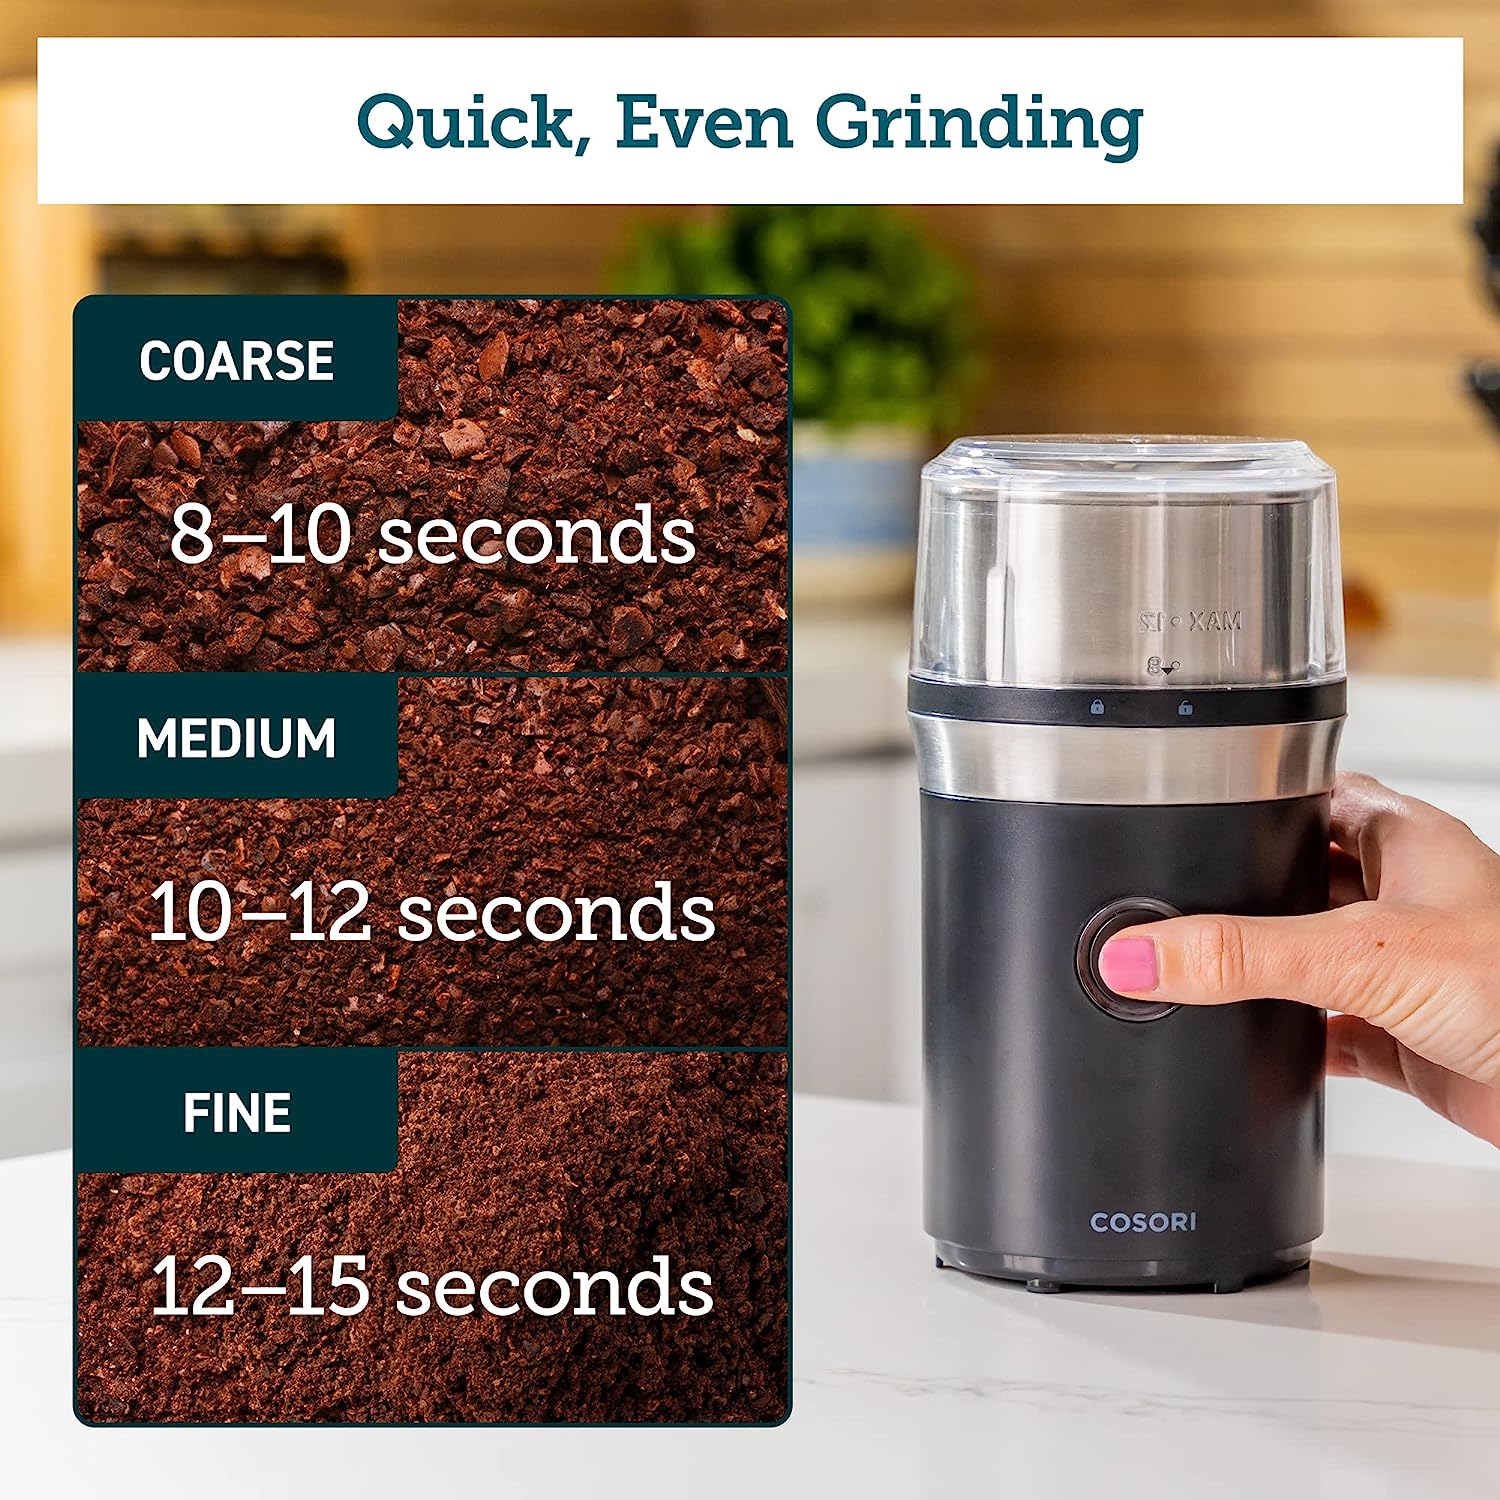 Kaffe Electric Blade Coffee Grinder w/Removable Cup. 4.5oz 14-Cup Capacity.  Cleaning Brush Included. Perfect Grinder for Coffee, Tea, Spices, Corn,  Herbs. (Black)